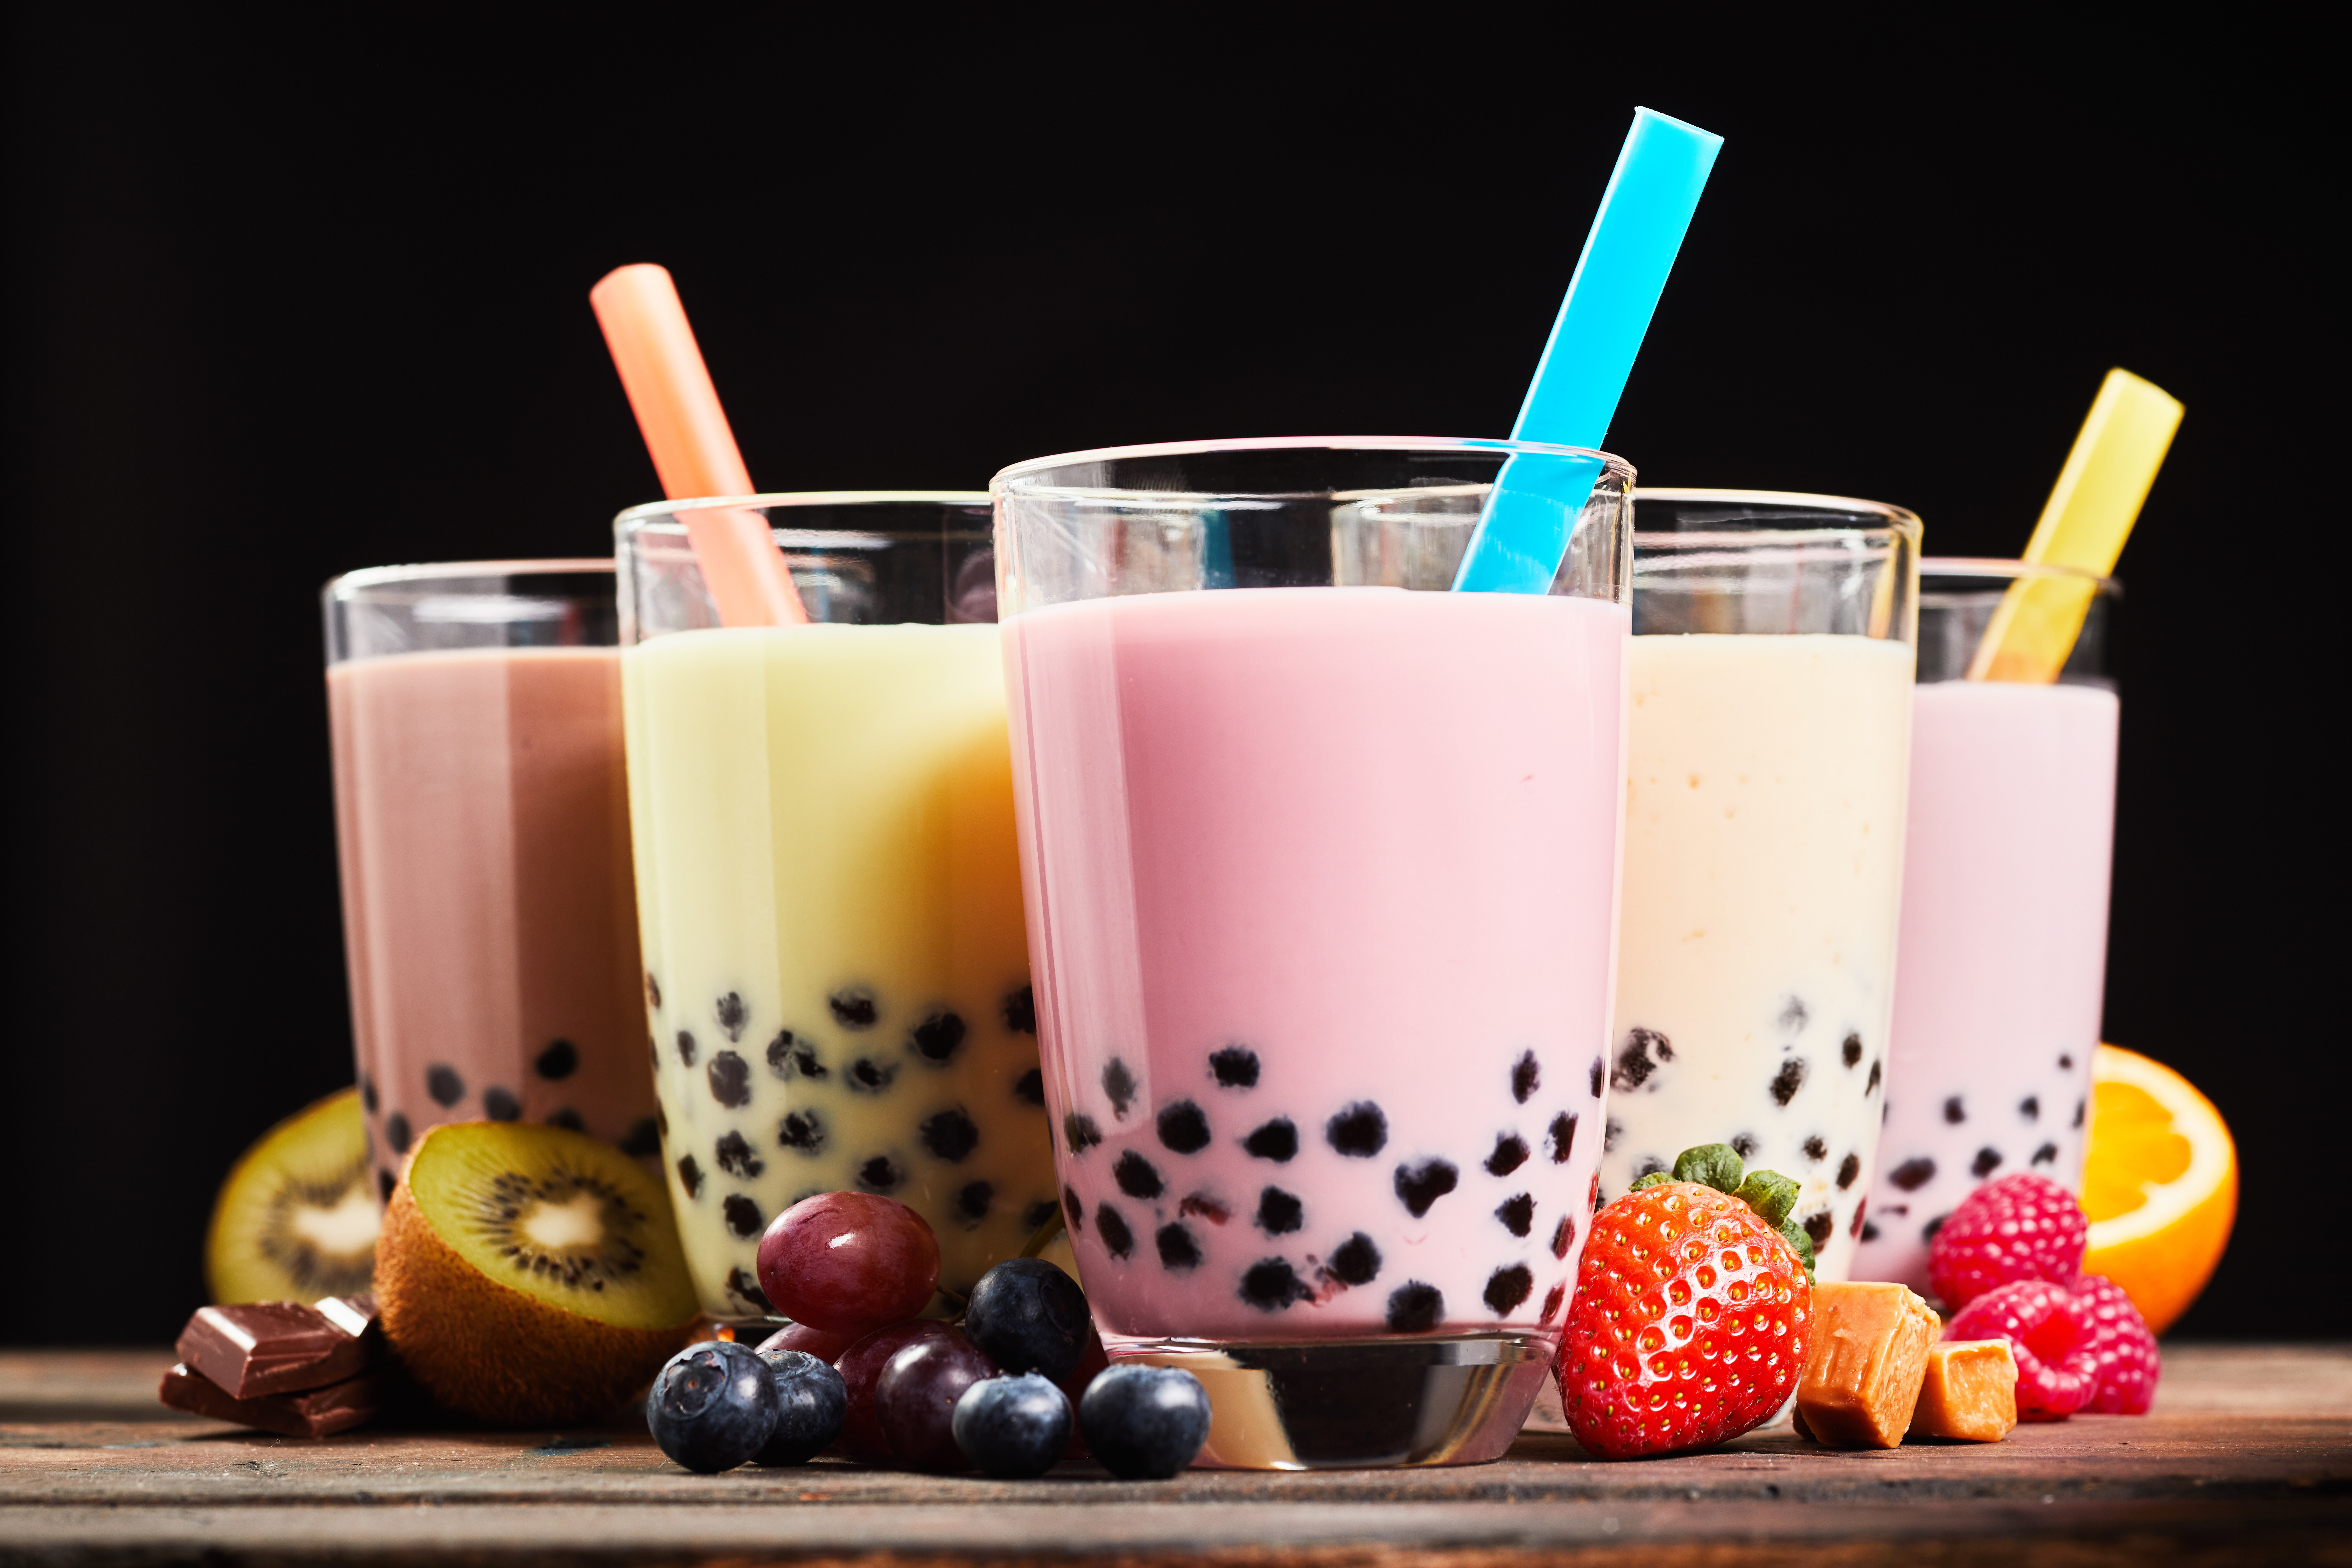 Glasses of refreshing milky boba or bubble tea with assorted fresh fruit ingredients, chocolate and caramel candy used as flavoring, low angle side view